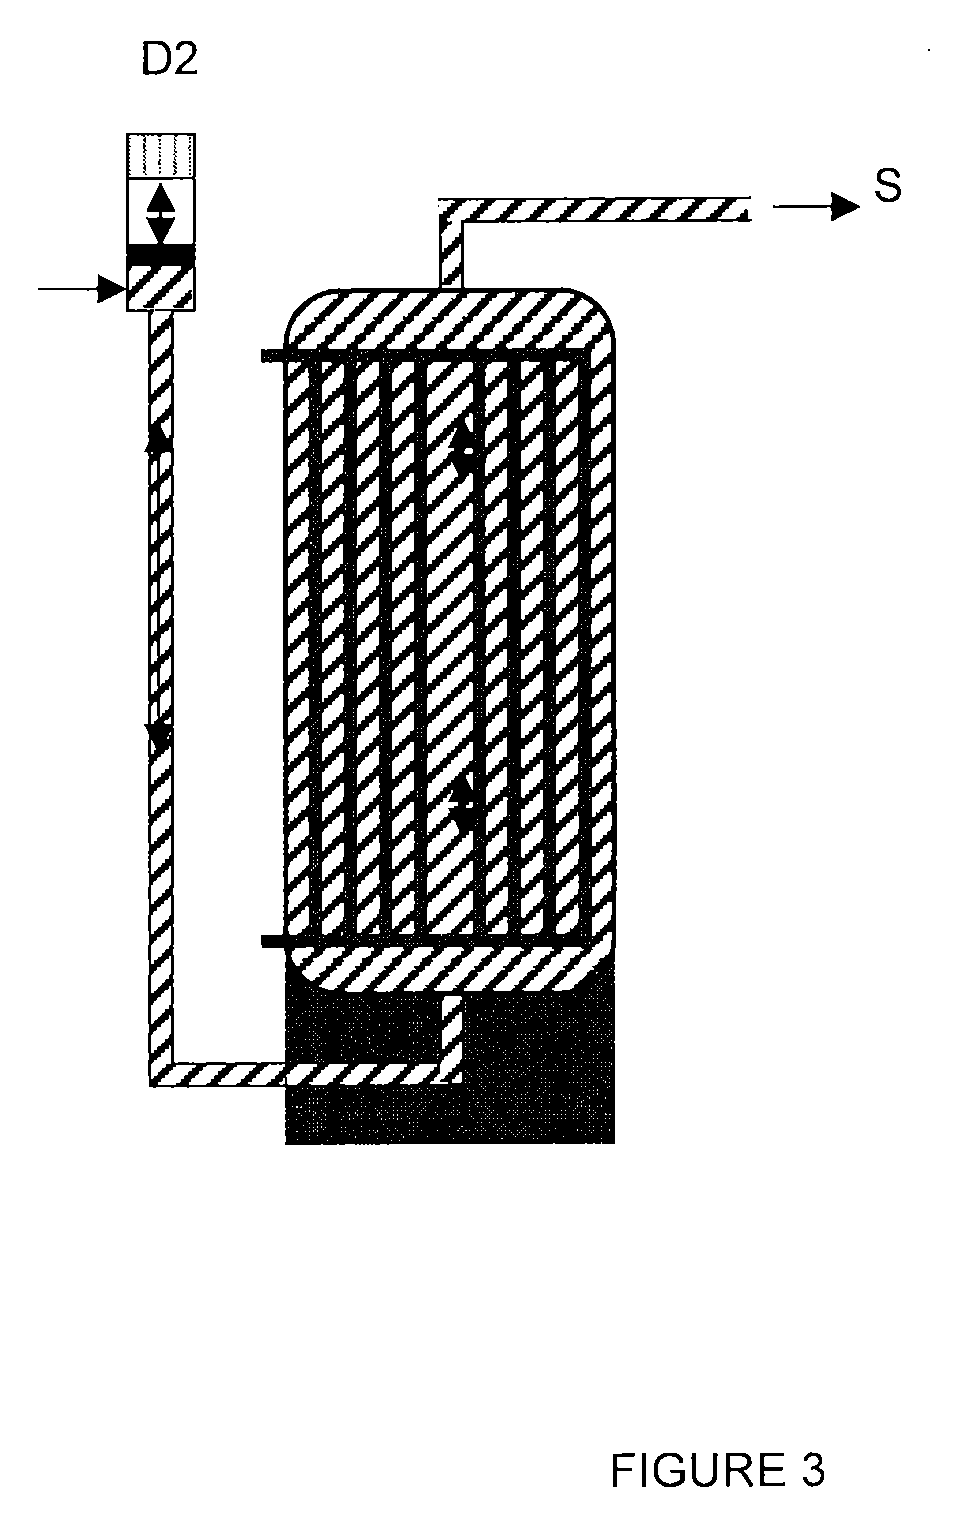 Crystallization apparatus and process for molten fats